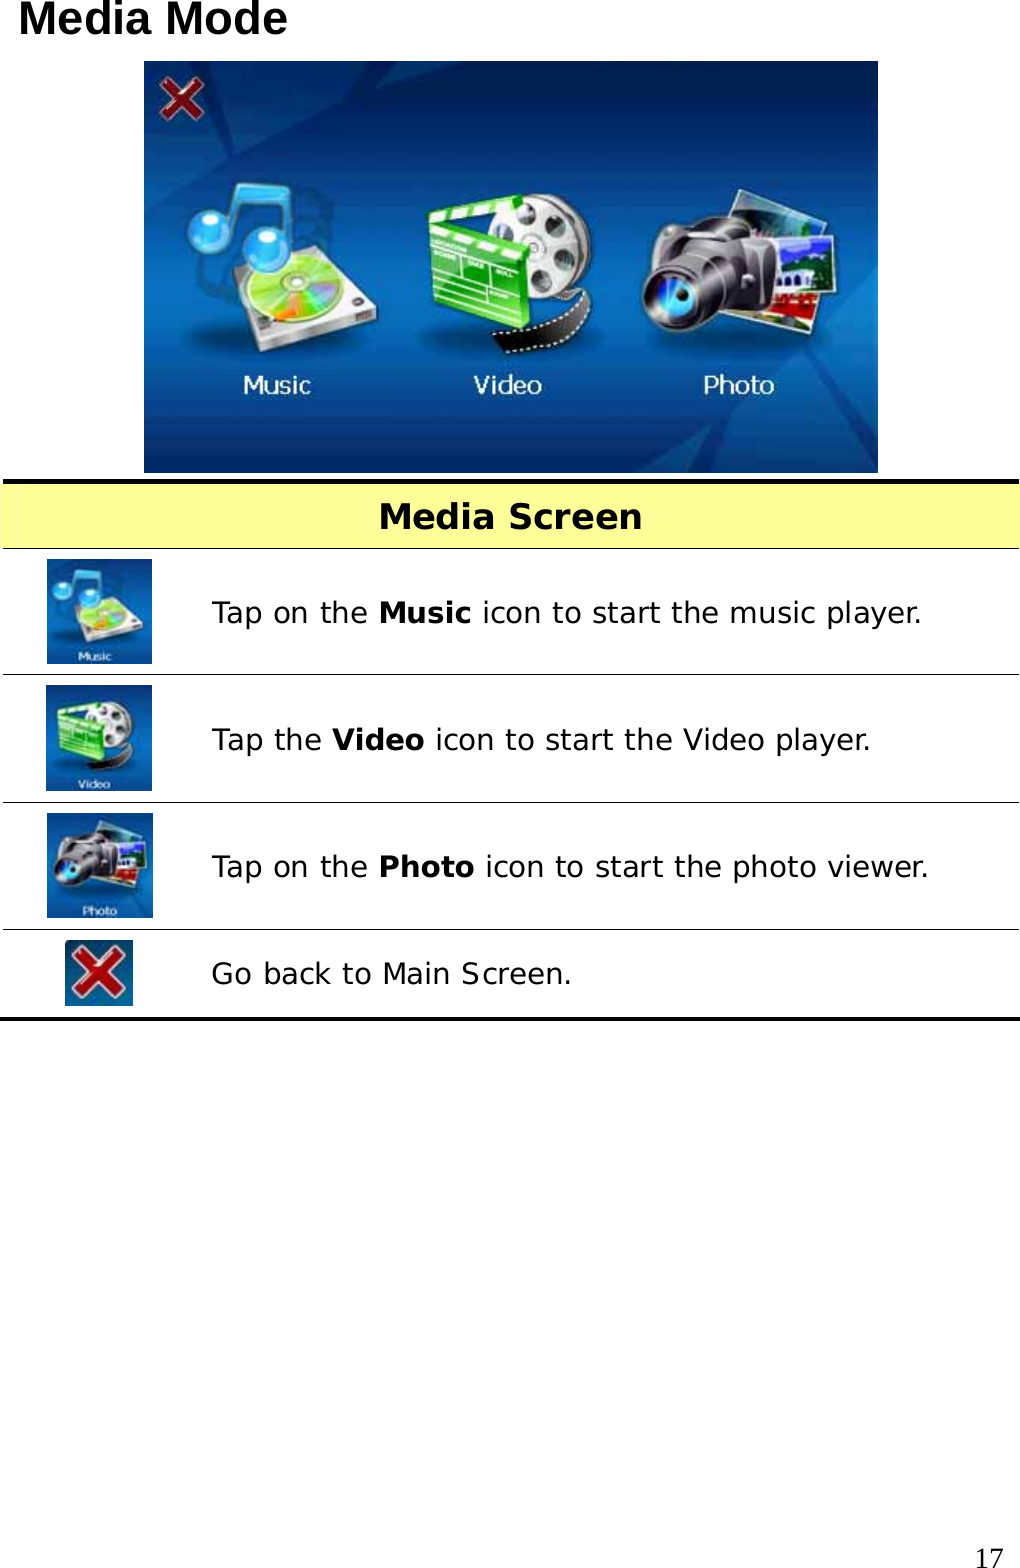  17Media Mode  Media Screen  Tap on the Music icon to start the music player.  Tap the Video icon to start the Video player.  Tap on the Photo icon to start the photo viewer.  Go back to Main Screen.   